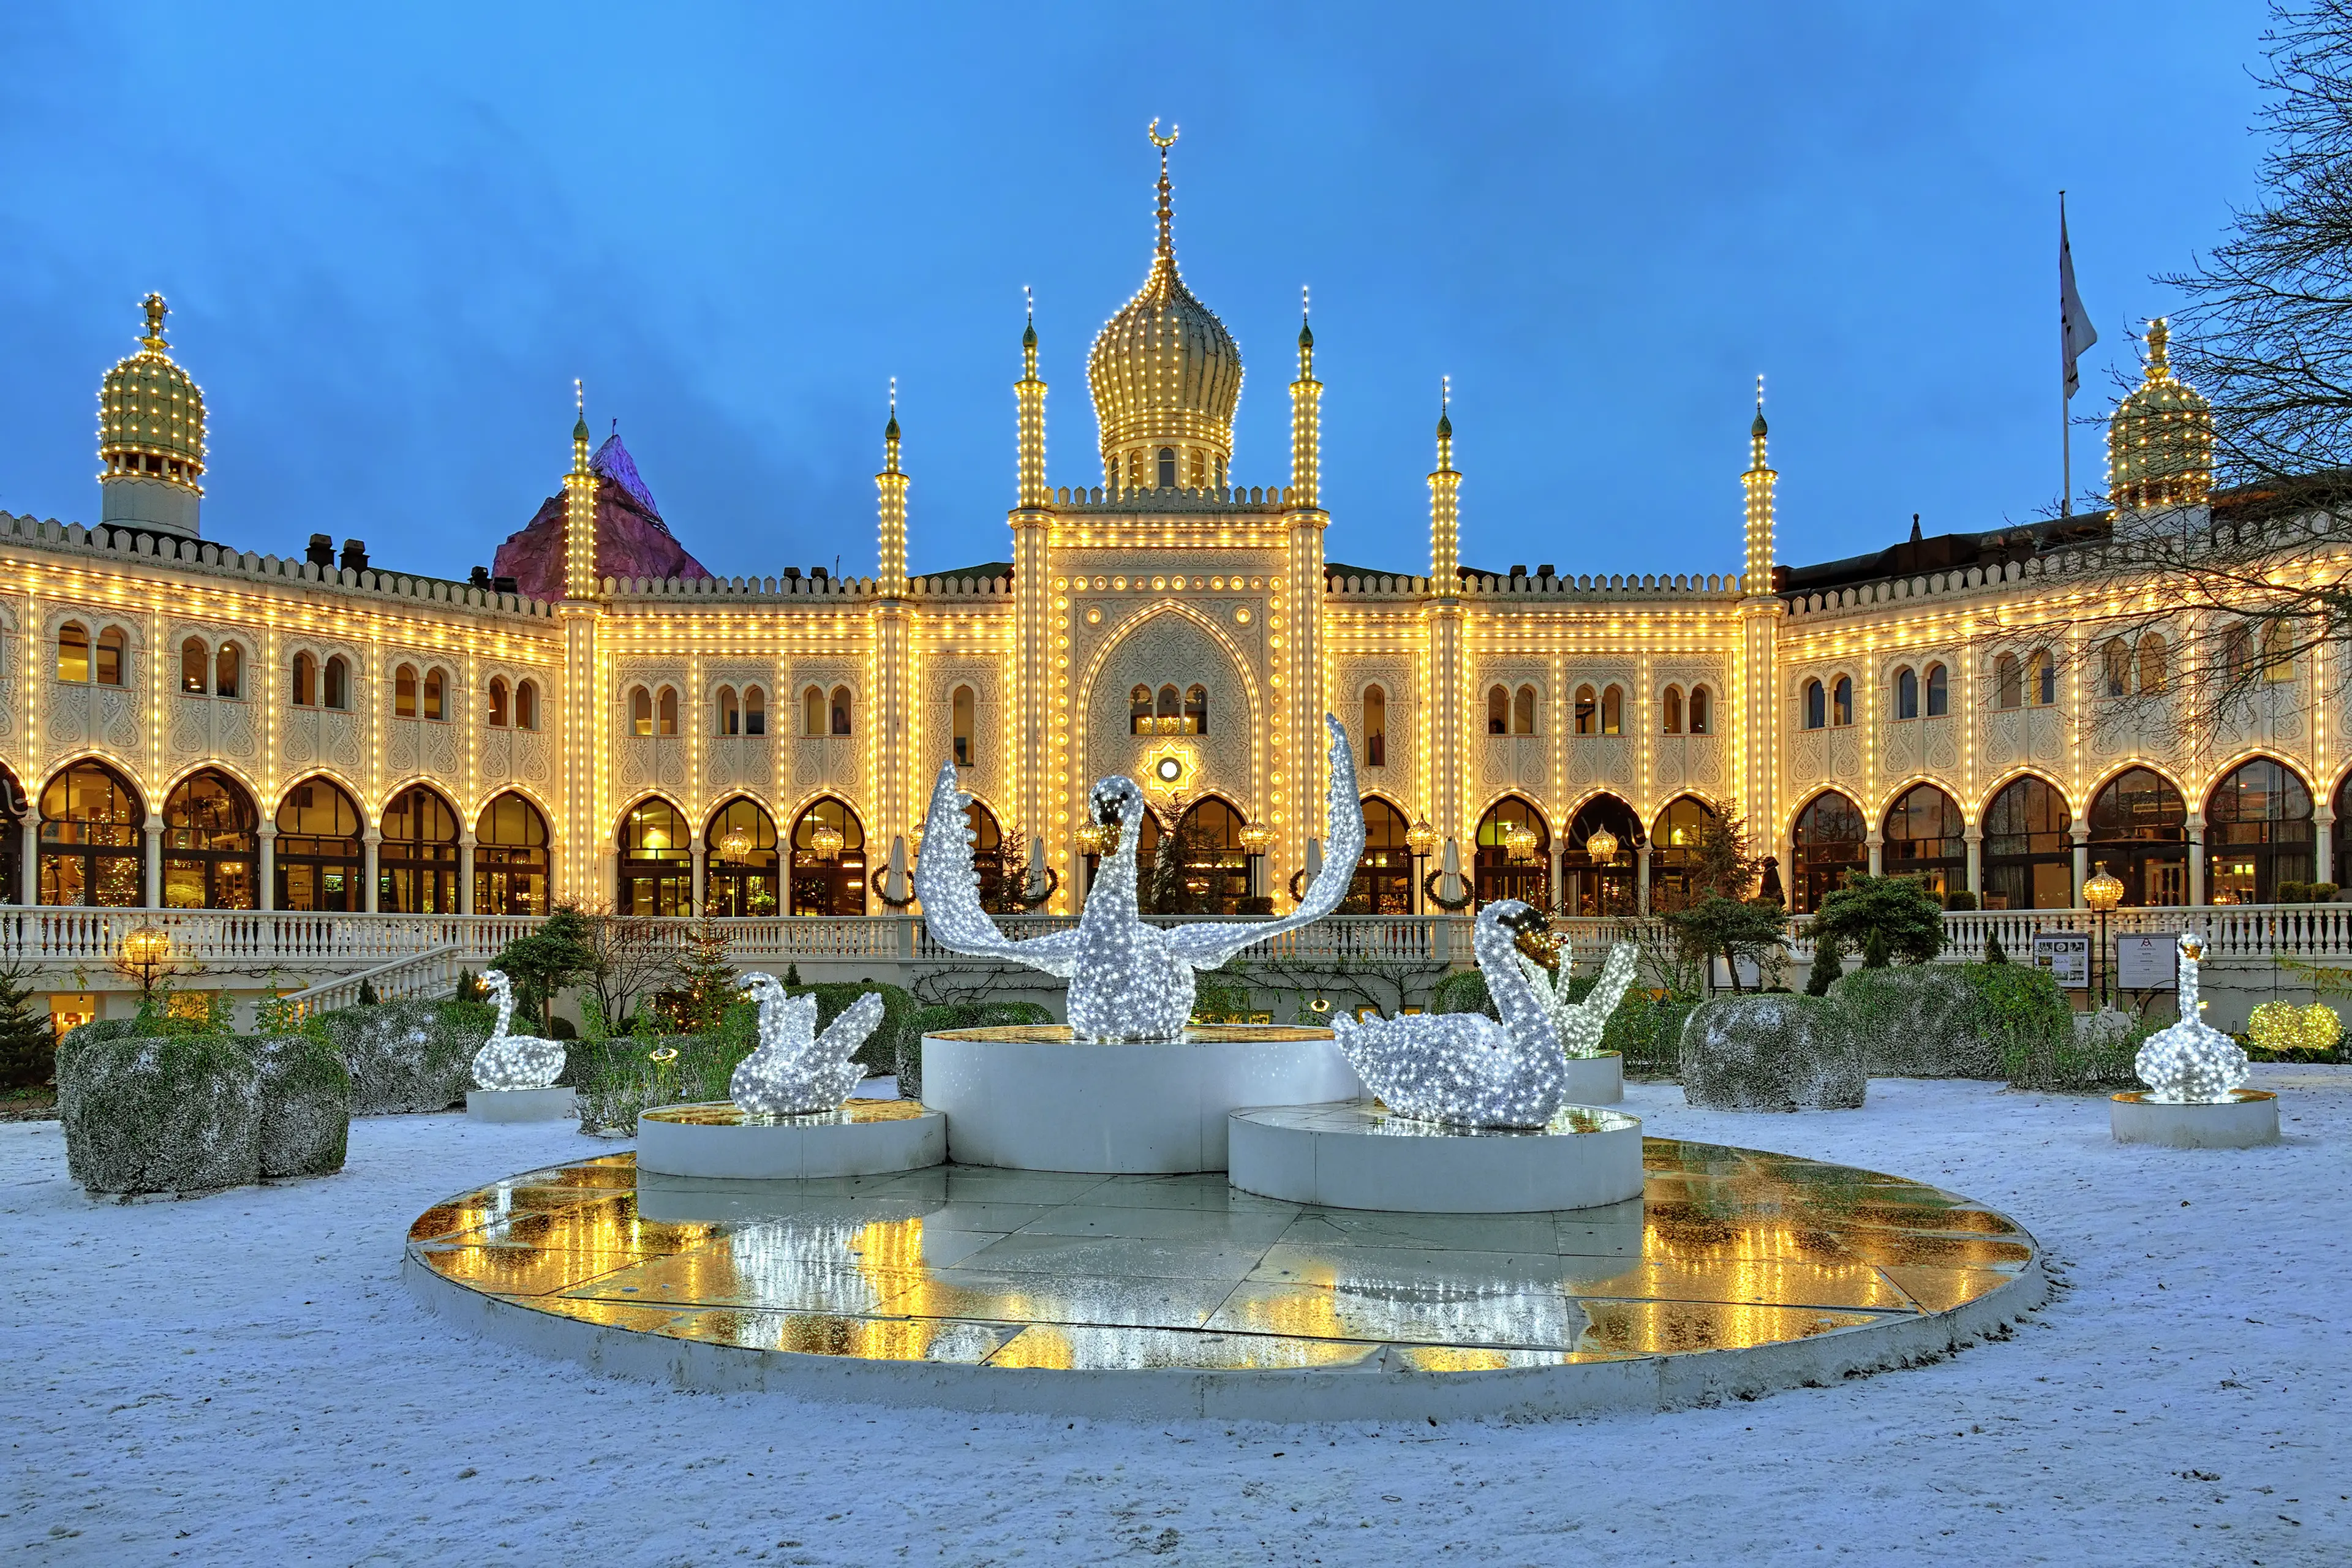 The Christmas installation with Swans in front of the Moorish Palace in Tivoli Gardens